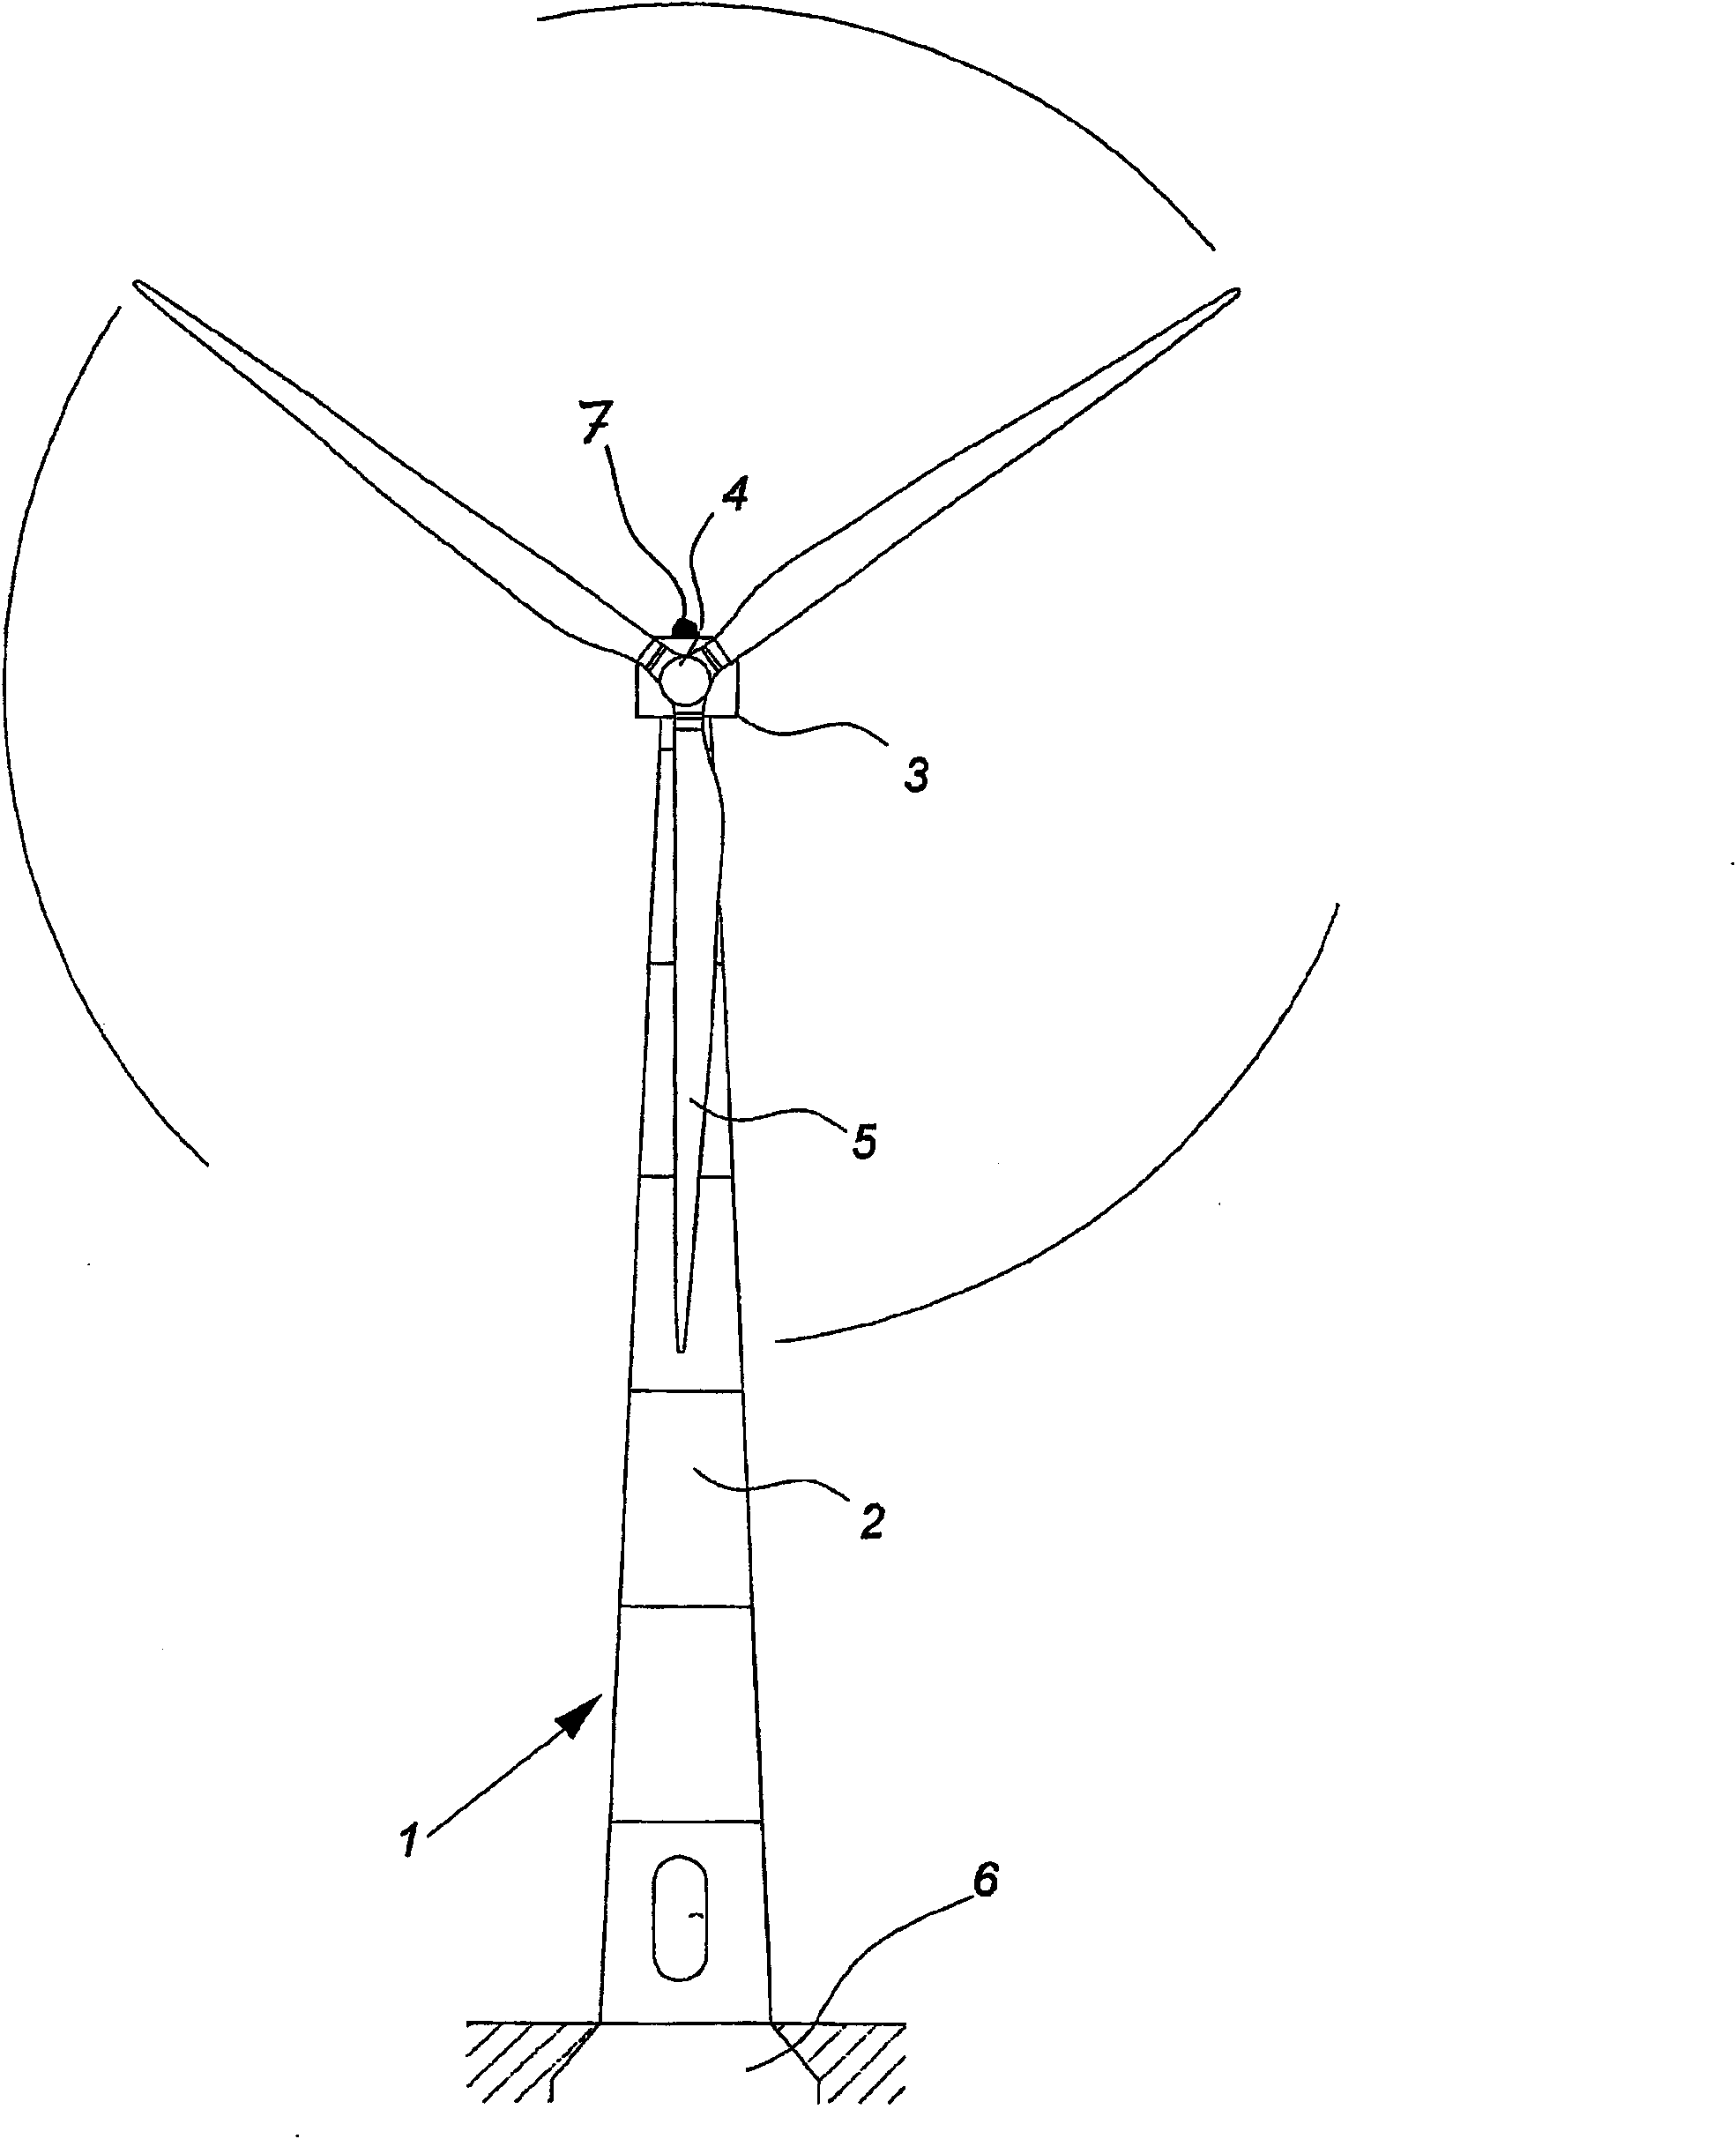 Improved lightning protection system for wind turbines